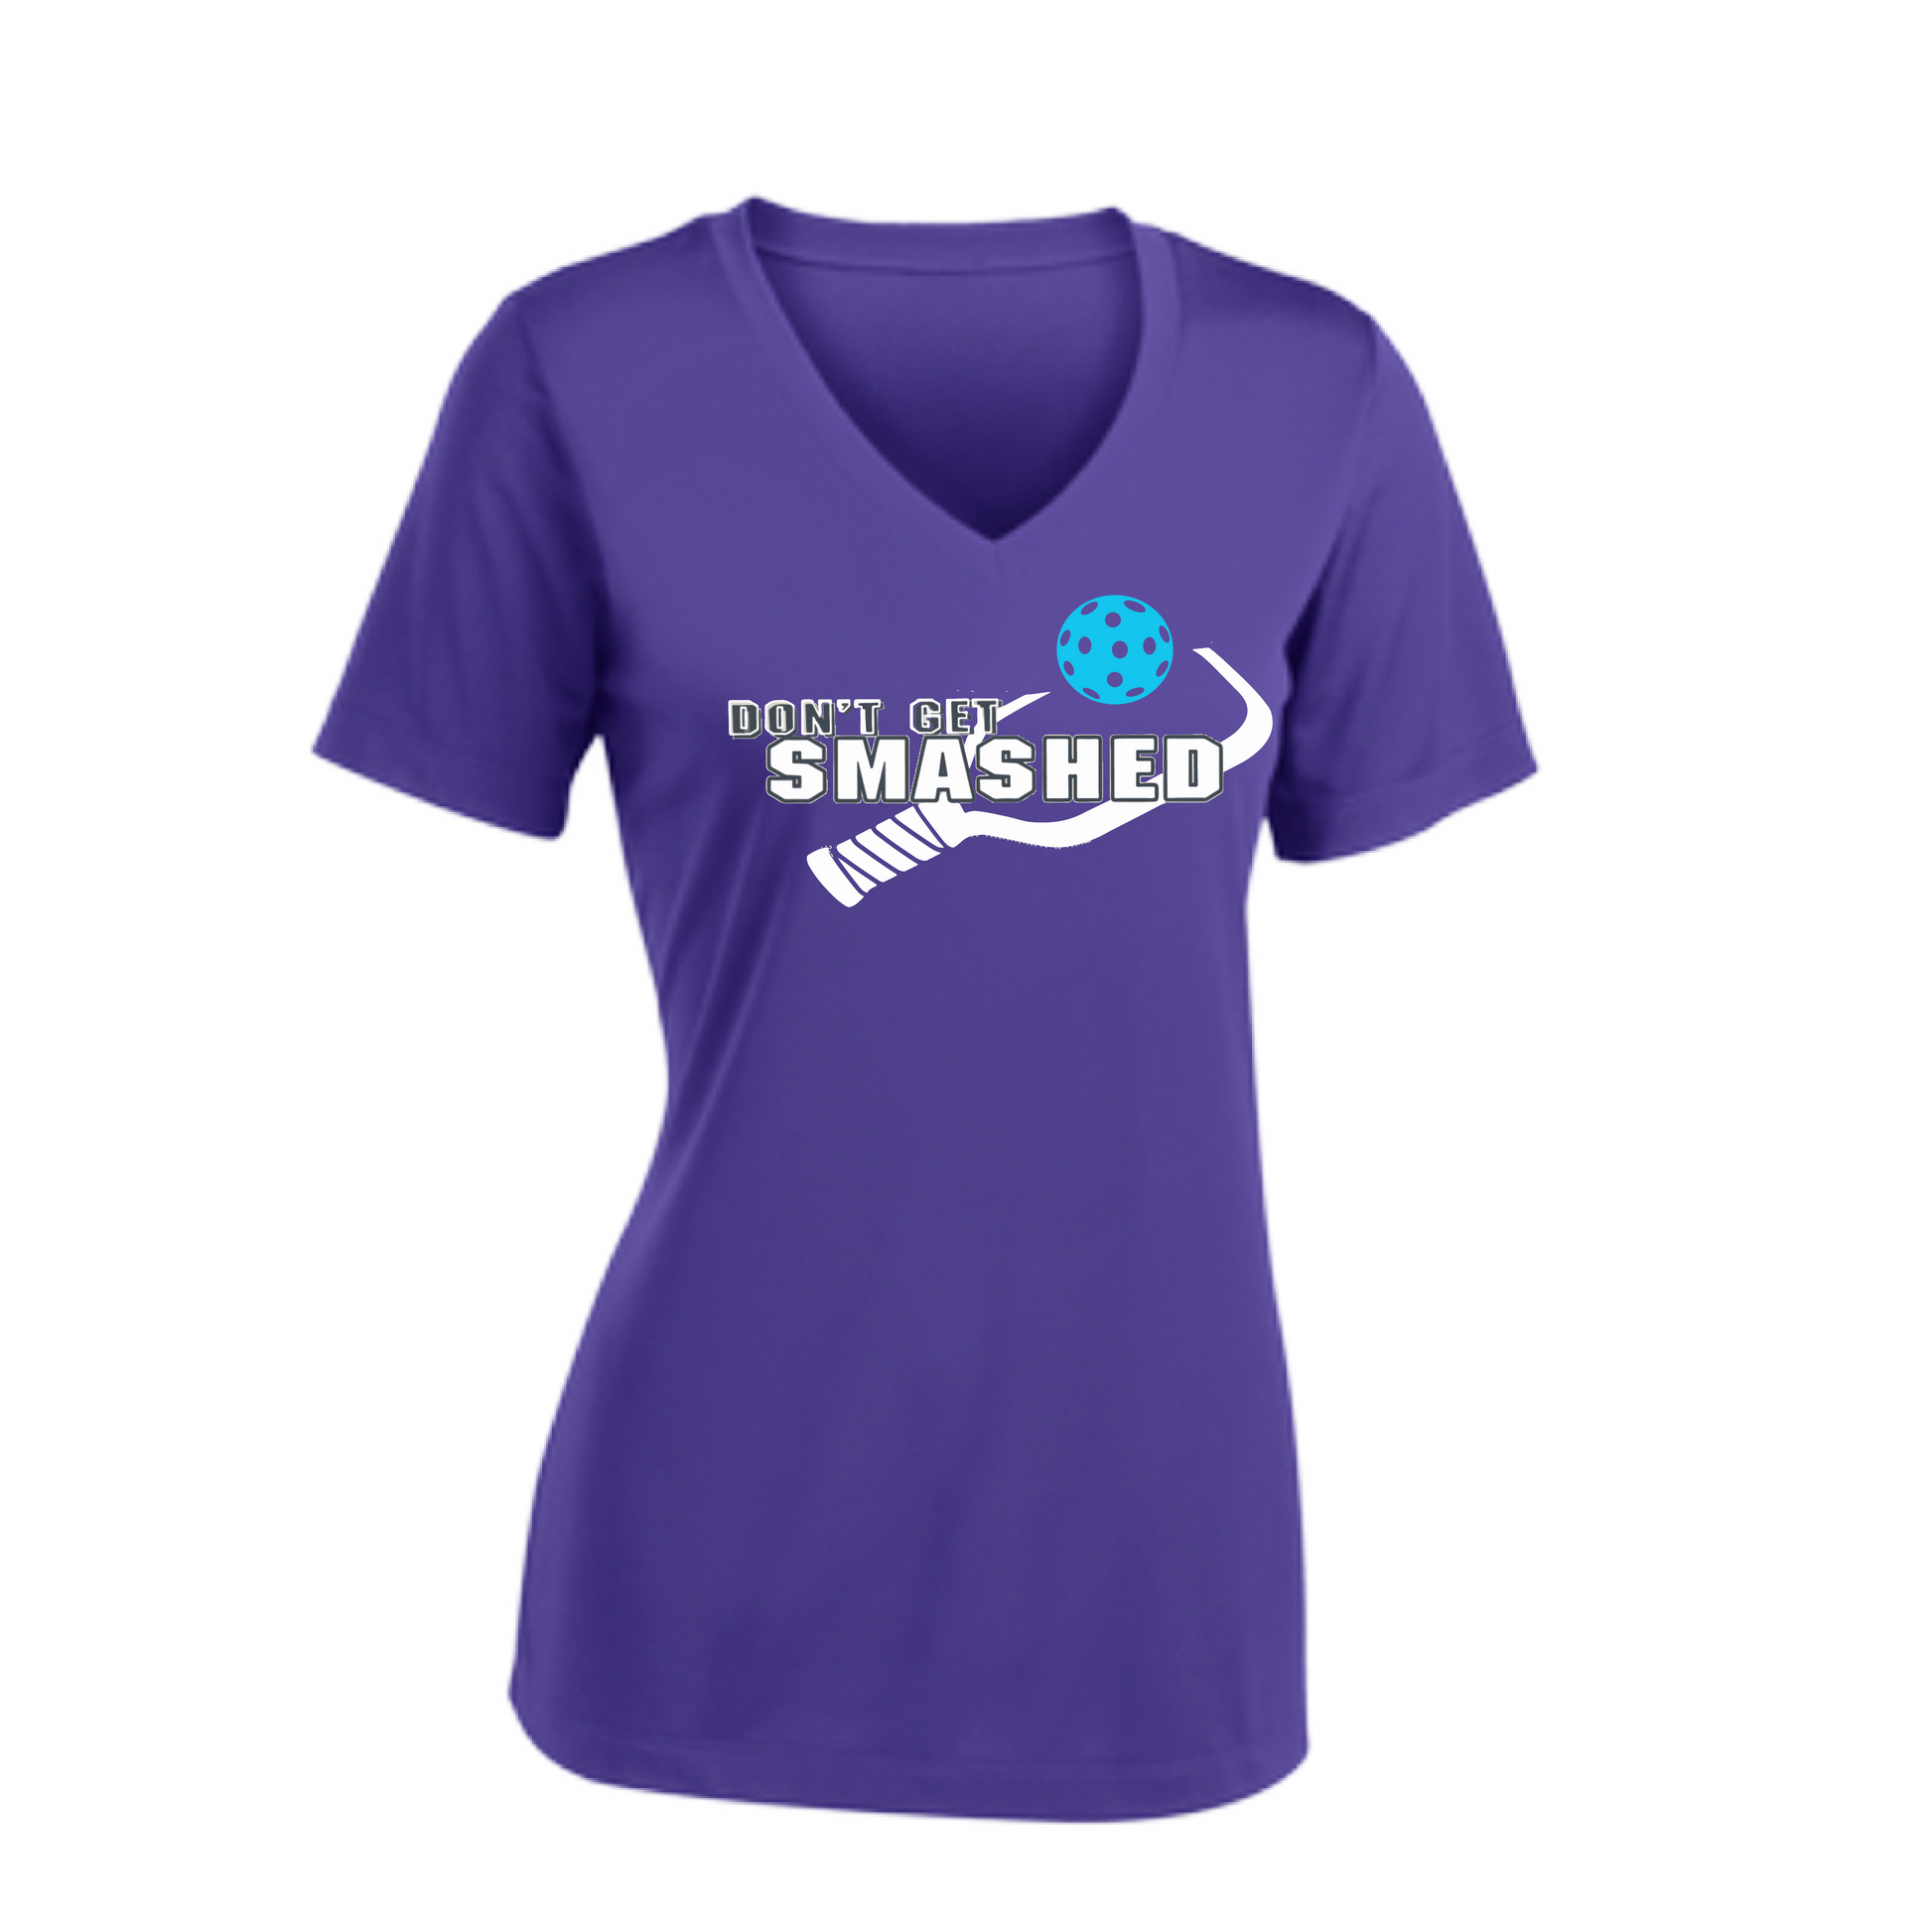 These Women's pickleball shirts provide the perfect balance of comfort and style. Crafted from a tri-blend fabric for softness and breathability, they feature PosiCharge technology to help retain color. Moisture wicking properties make this top exceptionally lightweight.